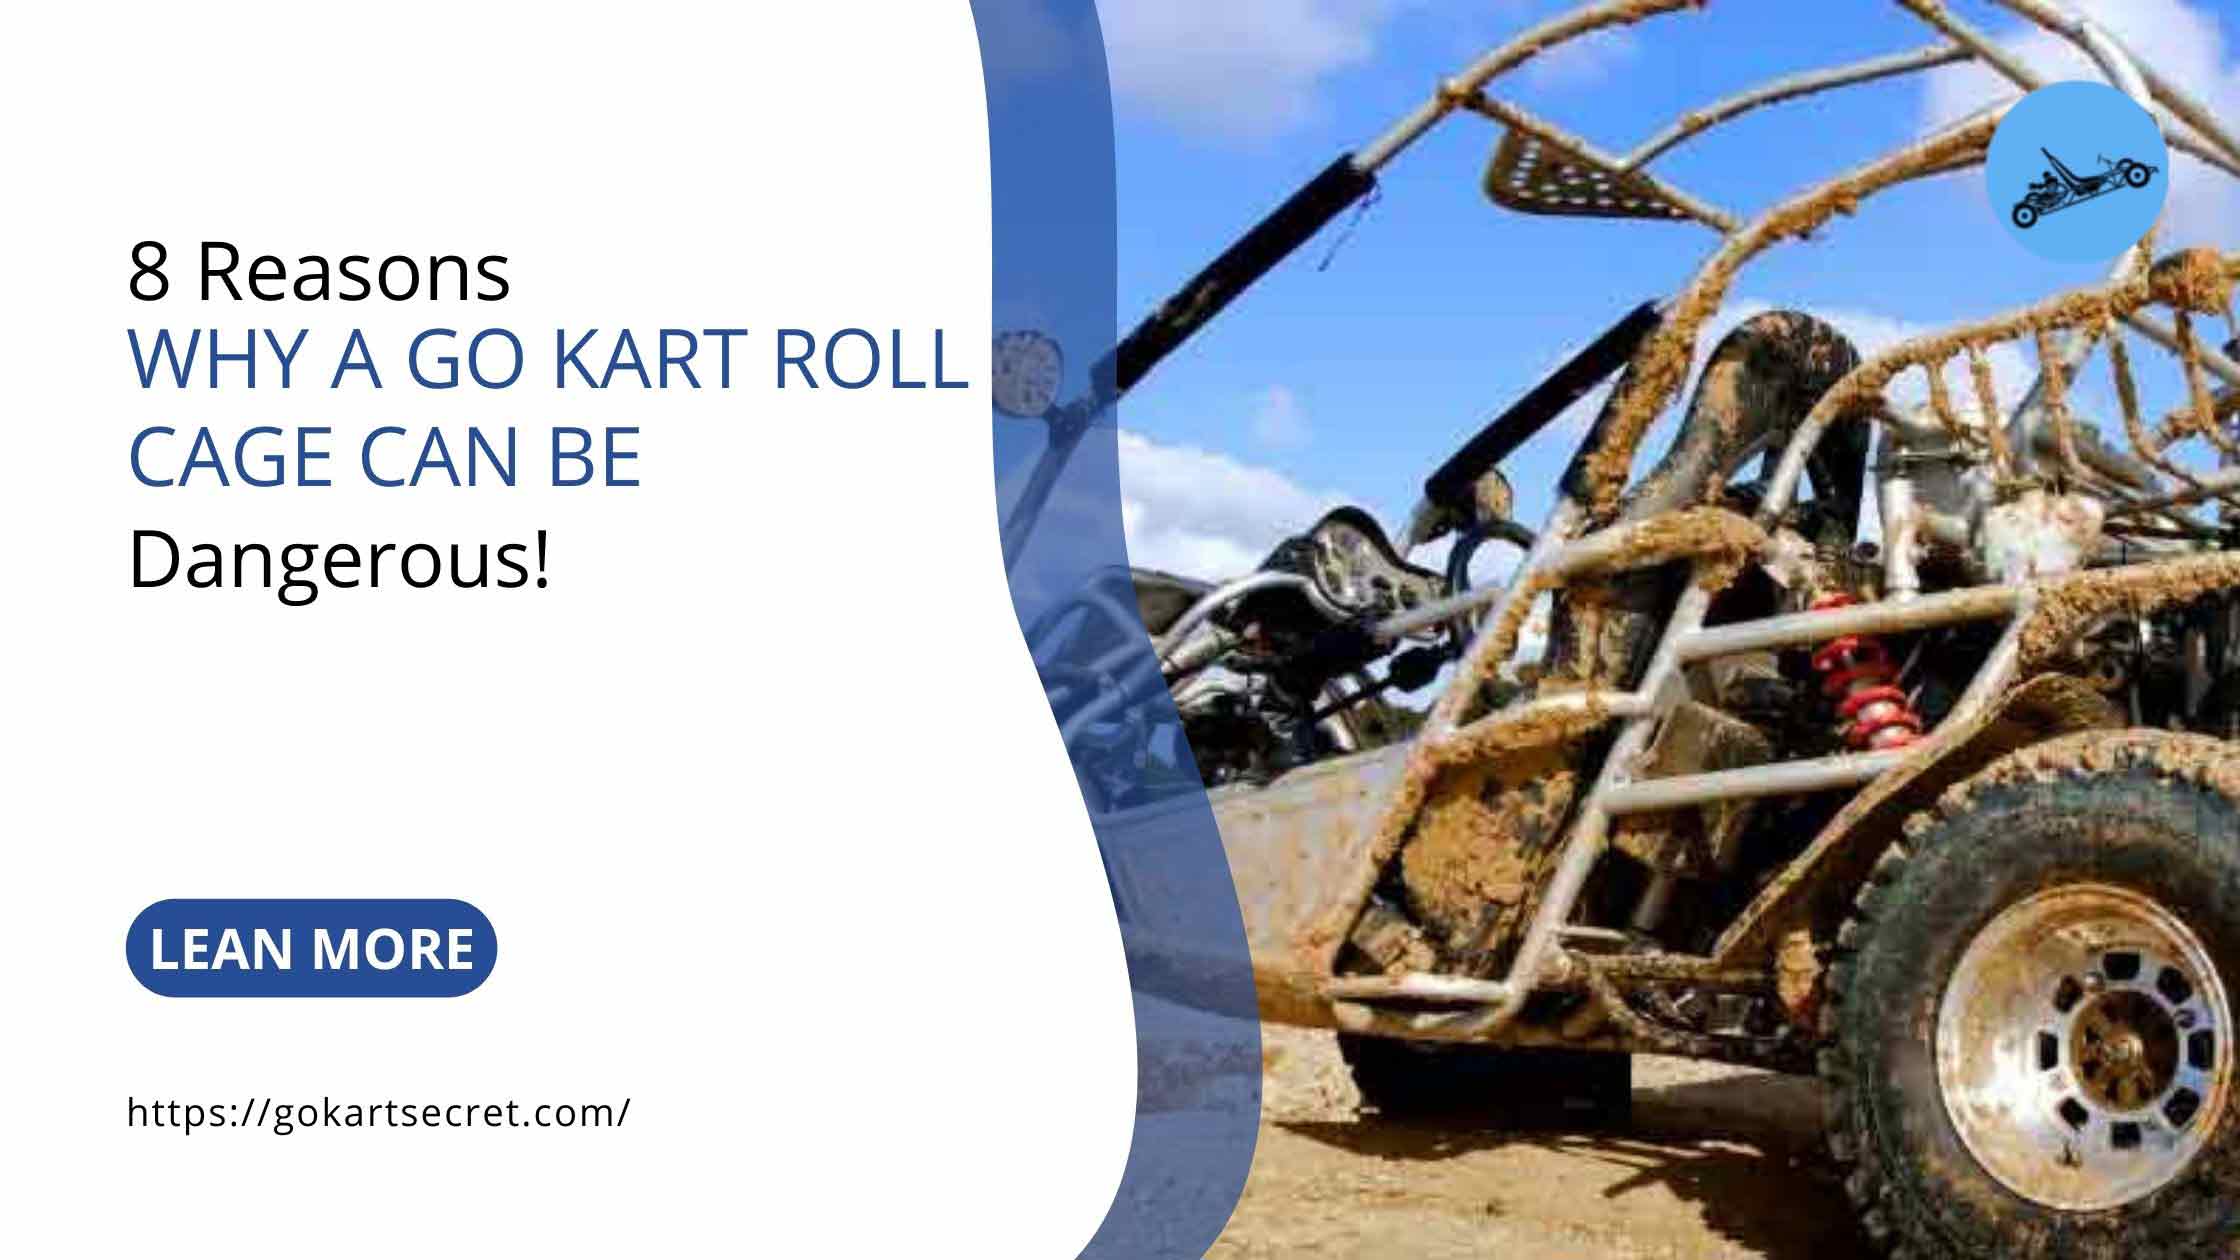 8 Reasons Why A Go Kart Roll Cage Can Be Dangerous